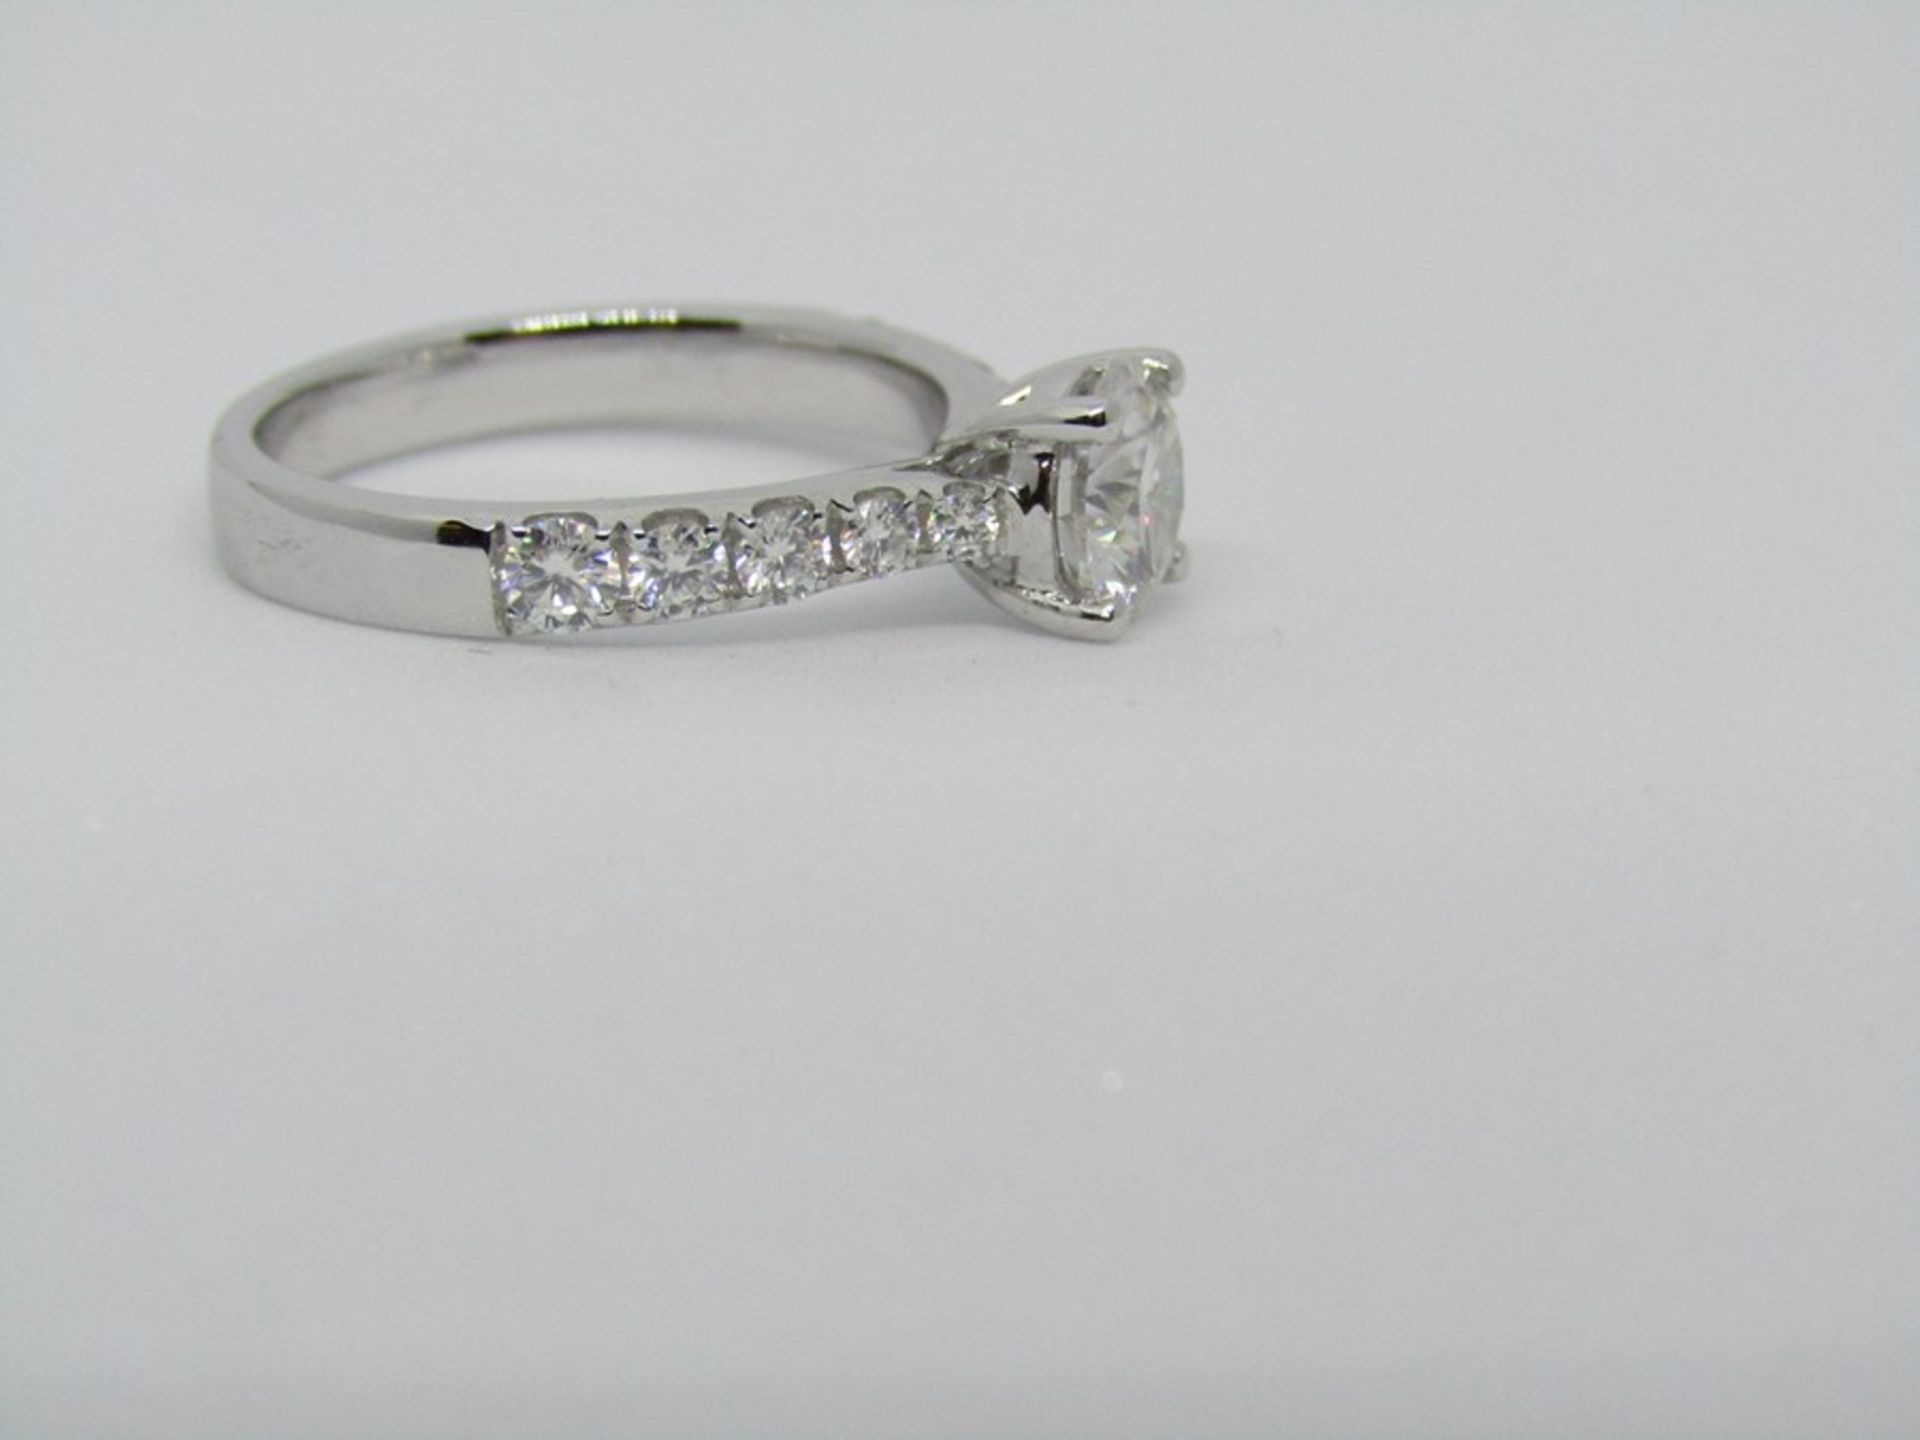 1ct Moissanite Ring set in 18ct White Gold, new. - Image 2 of 7